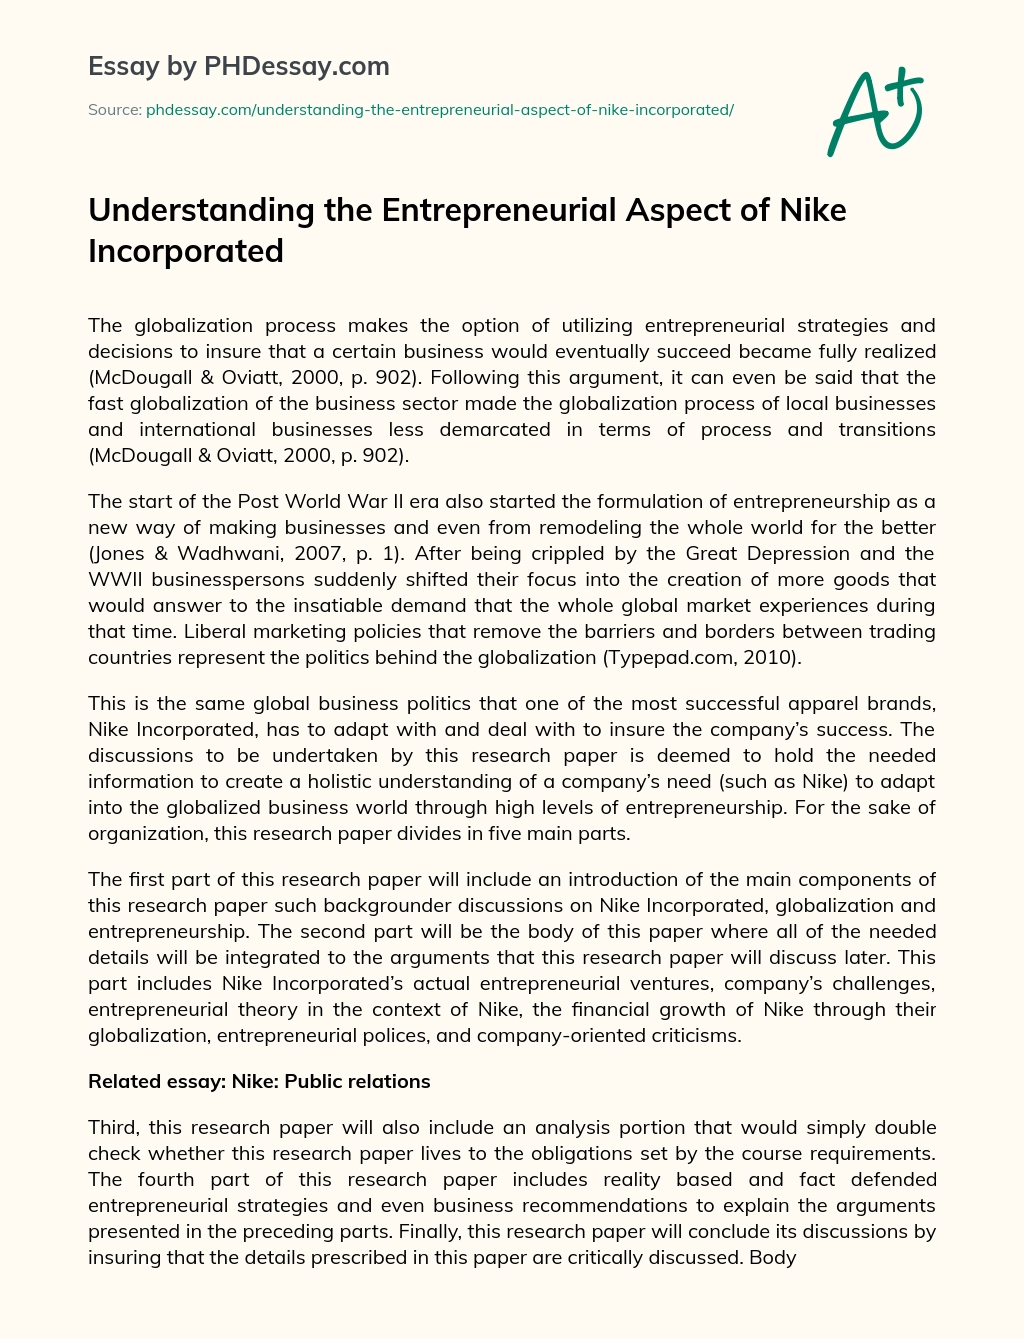 Understanding the Entrepreneurial Aspect of Nike Incorporated essay